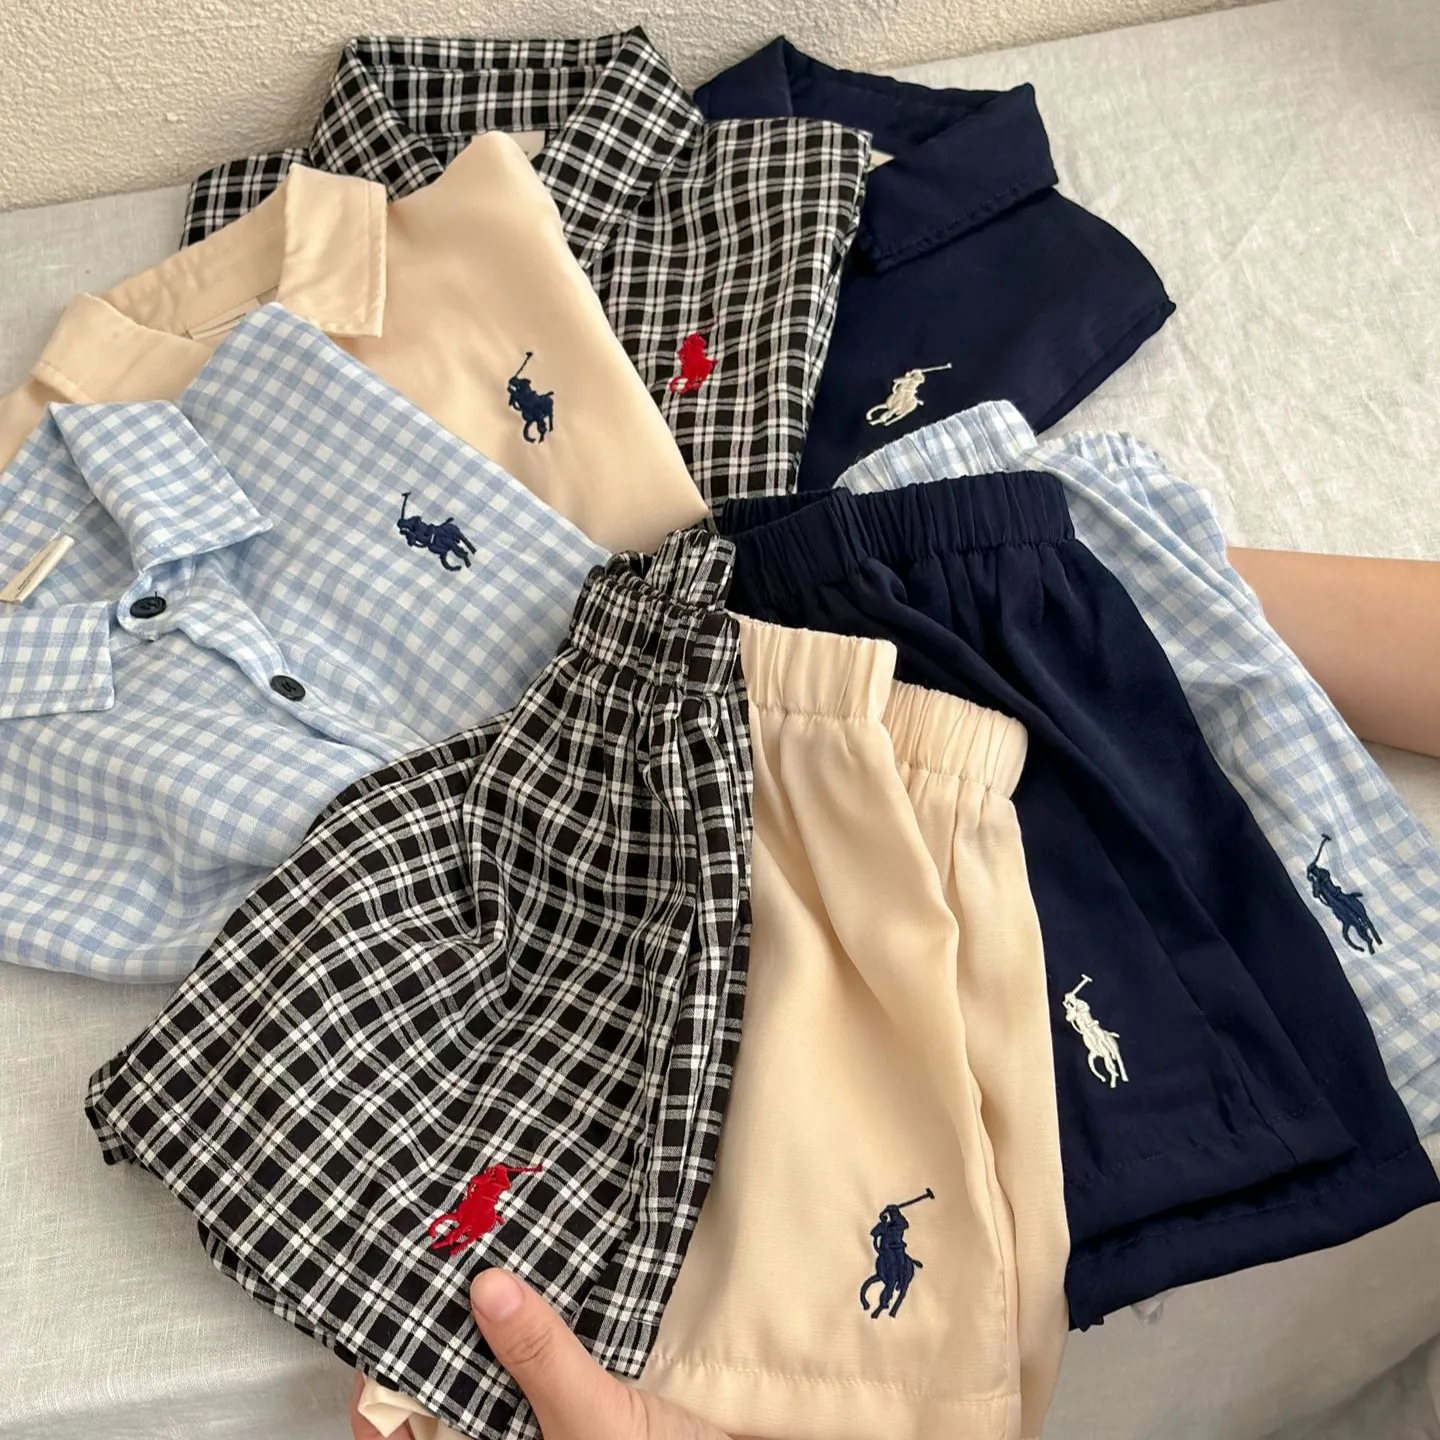 2023 new arrival Korean style infant toddler baby boy shirt with shorts casual 2 pc clothing sets 8088